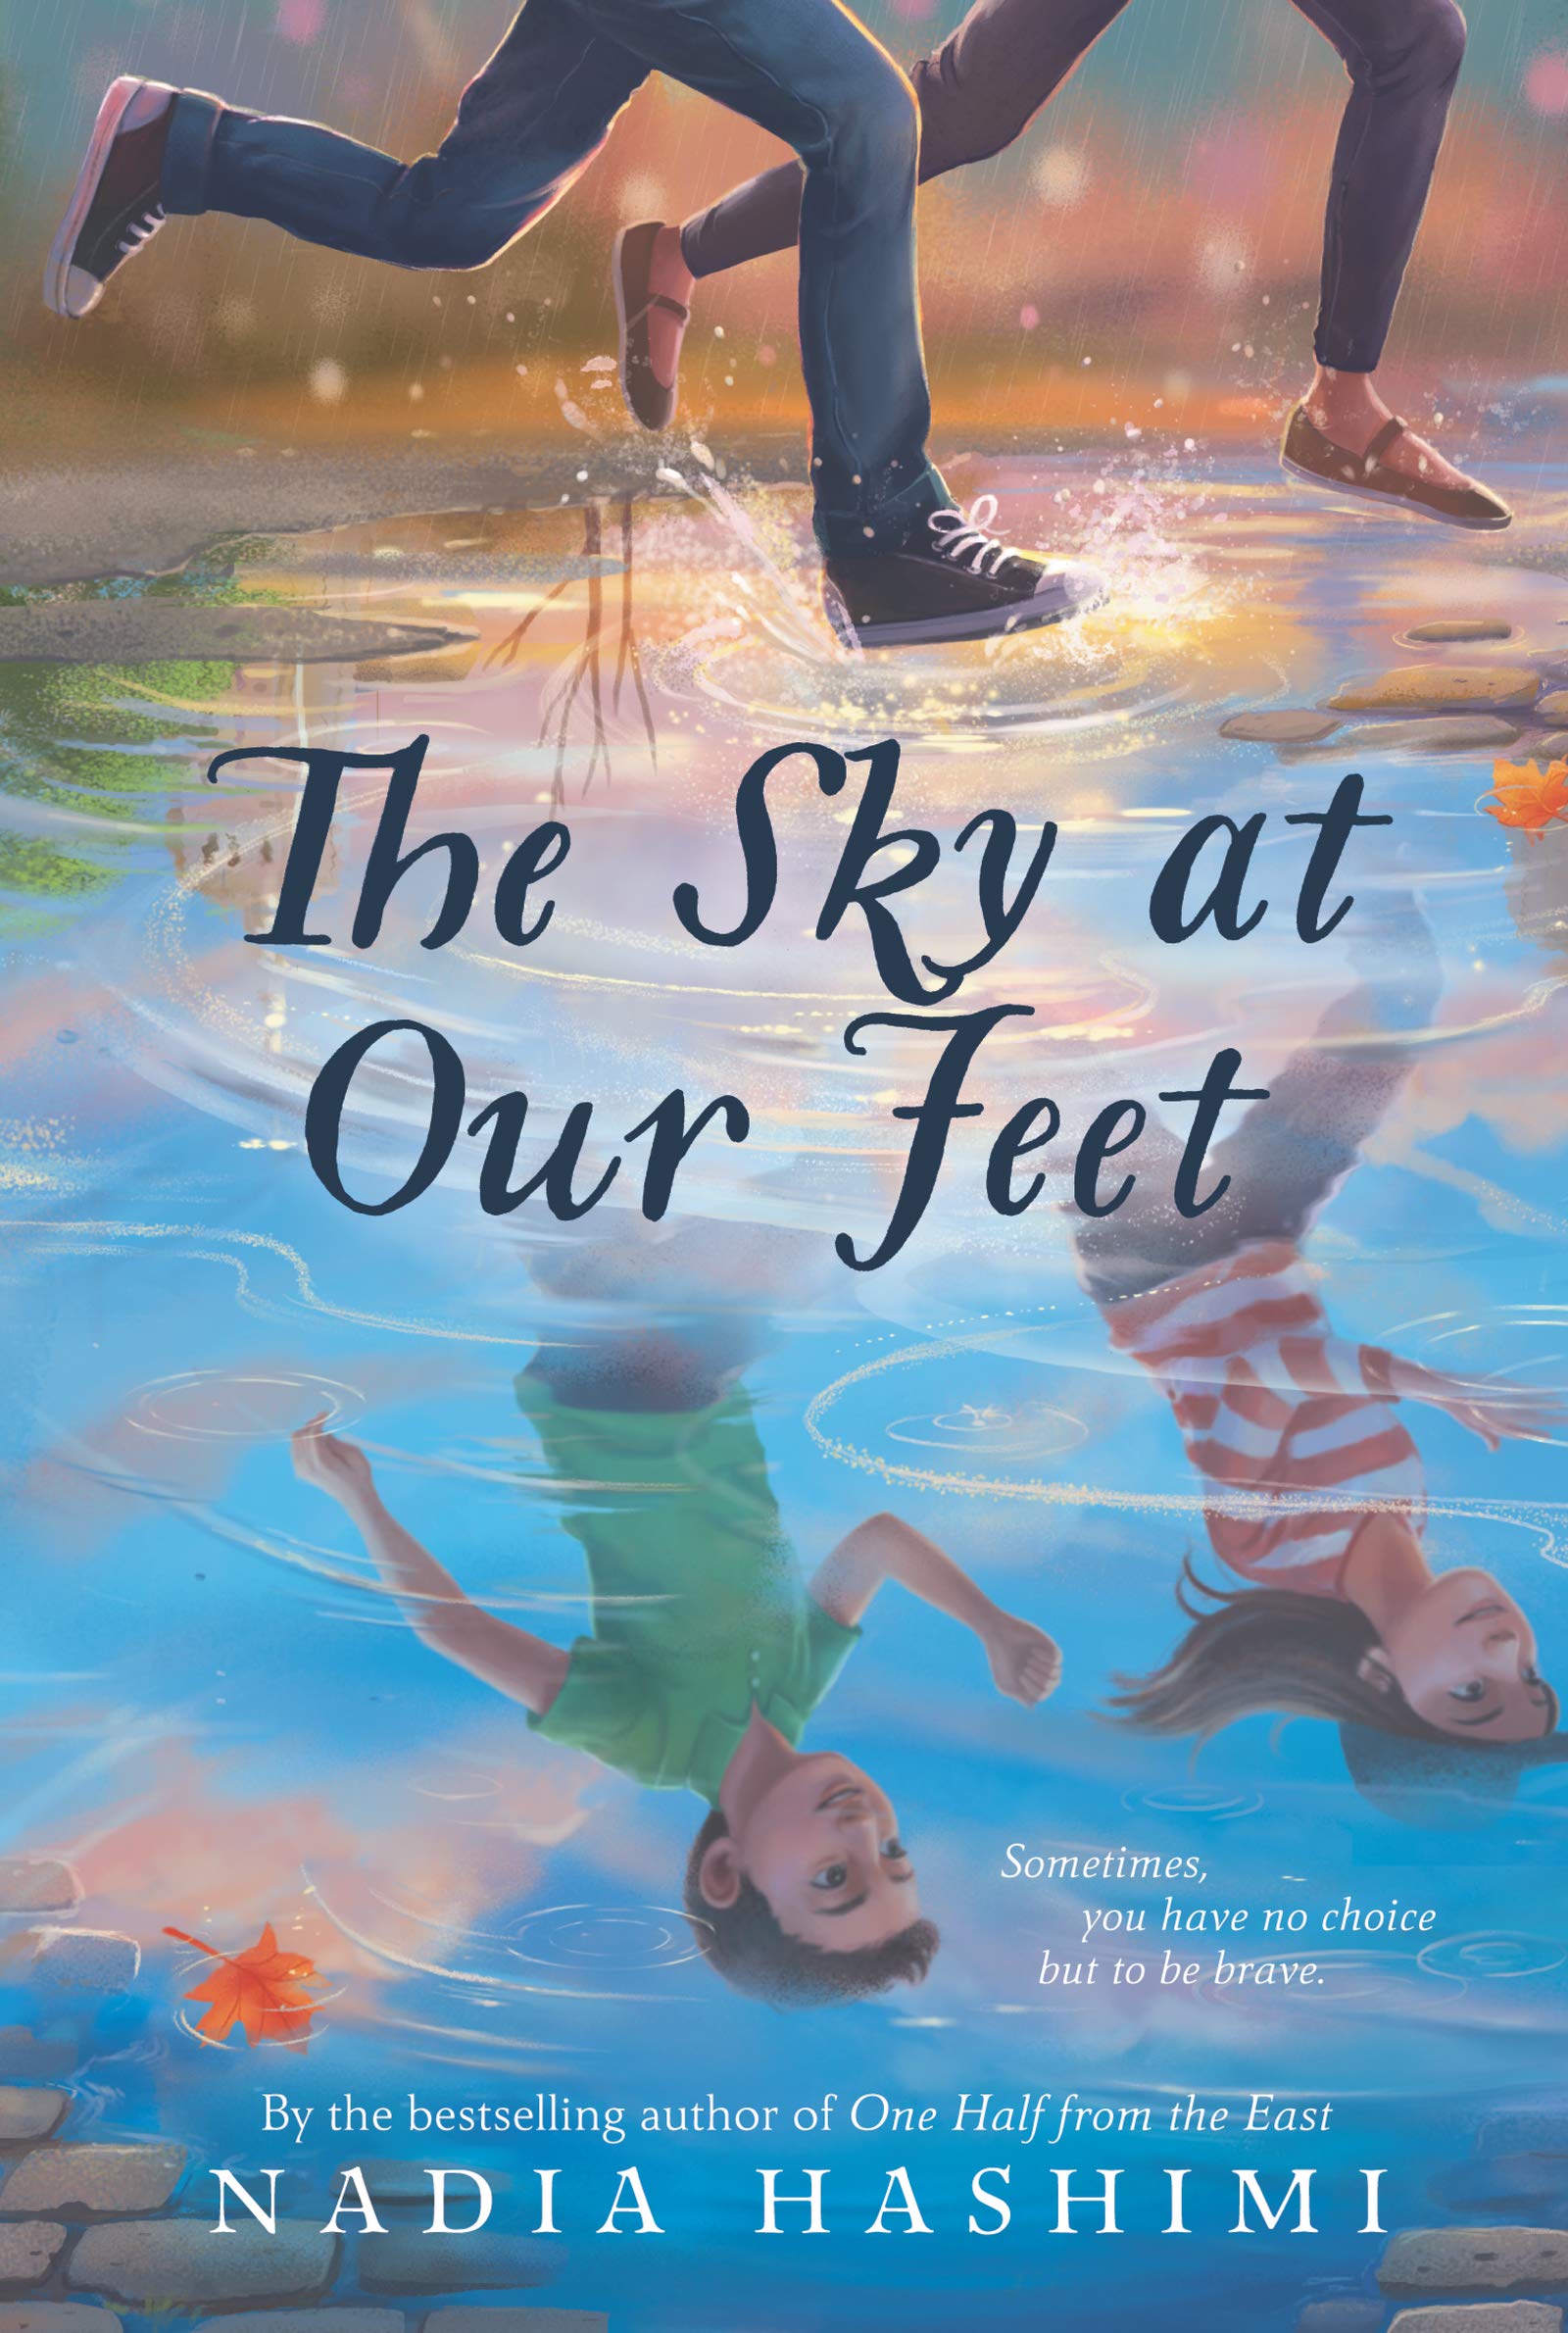 Book Cover The Sky at Our Feet